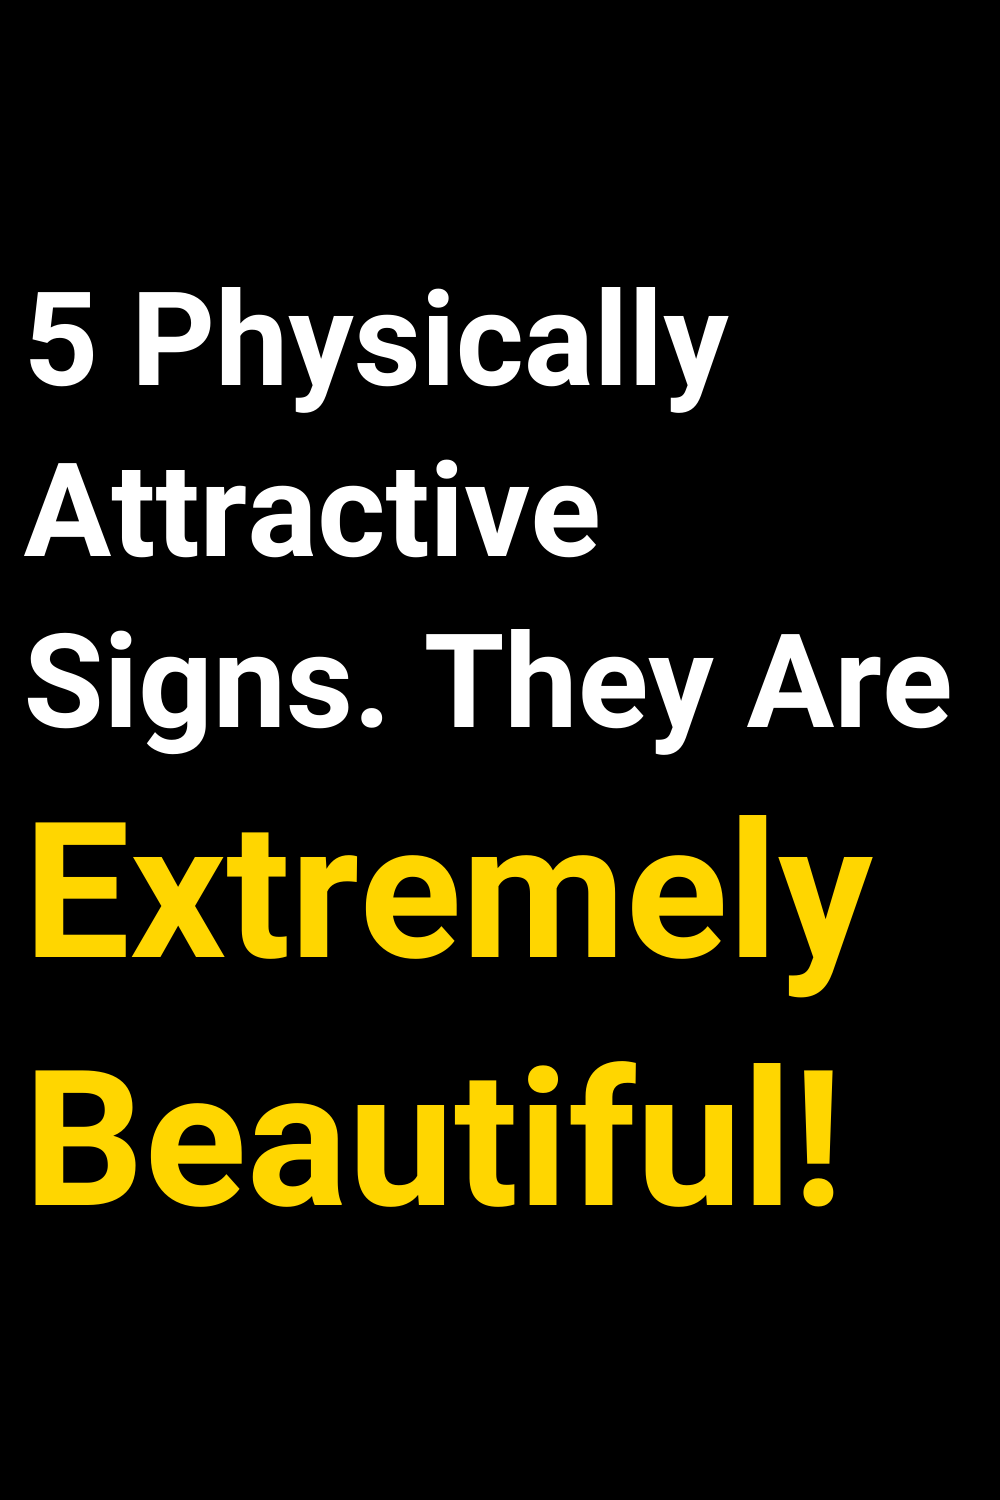 5 Physically Attractive Signs. They Are Extremely Beautiful!